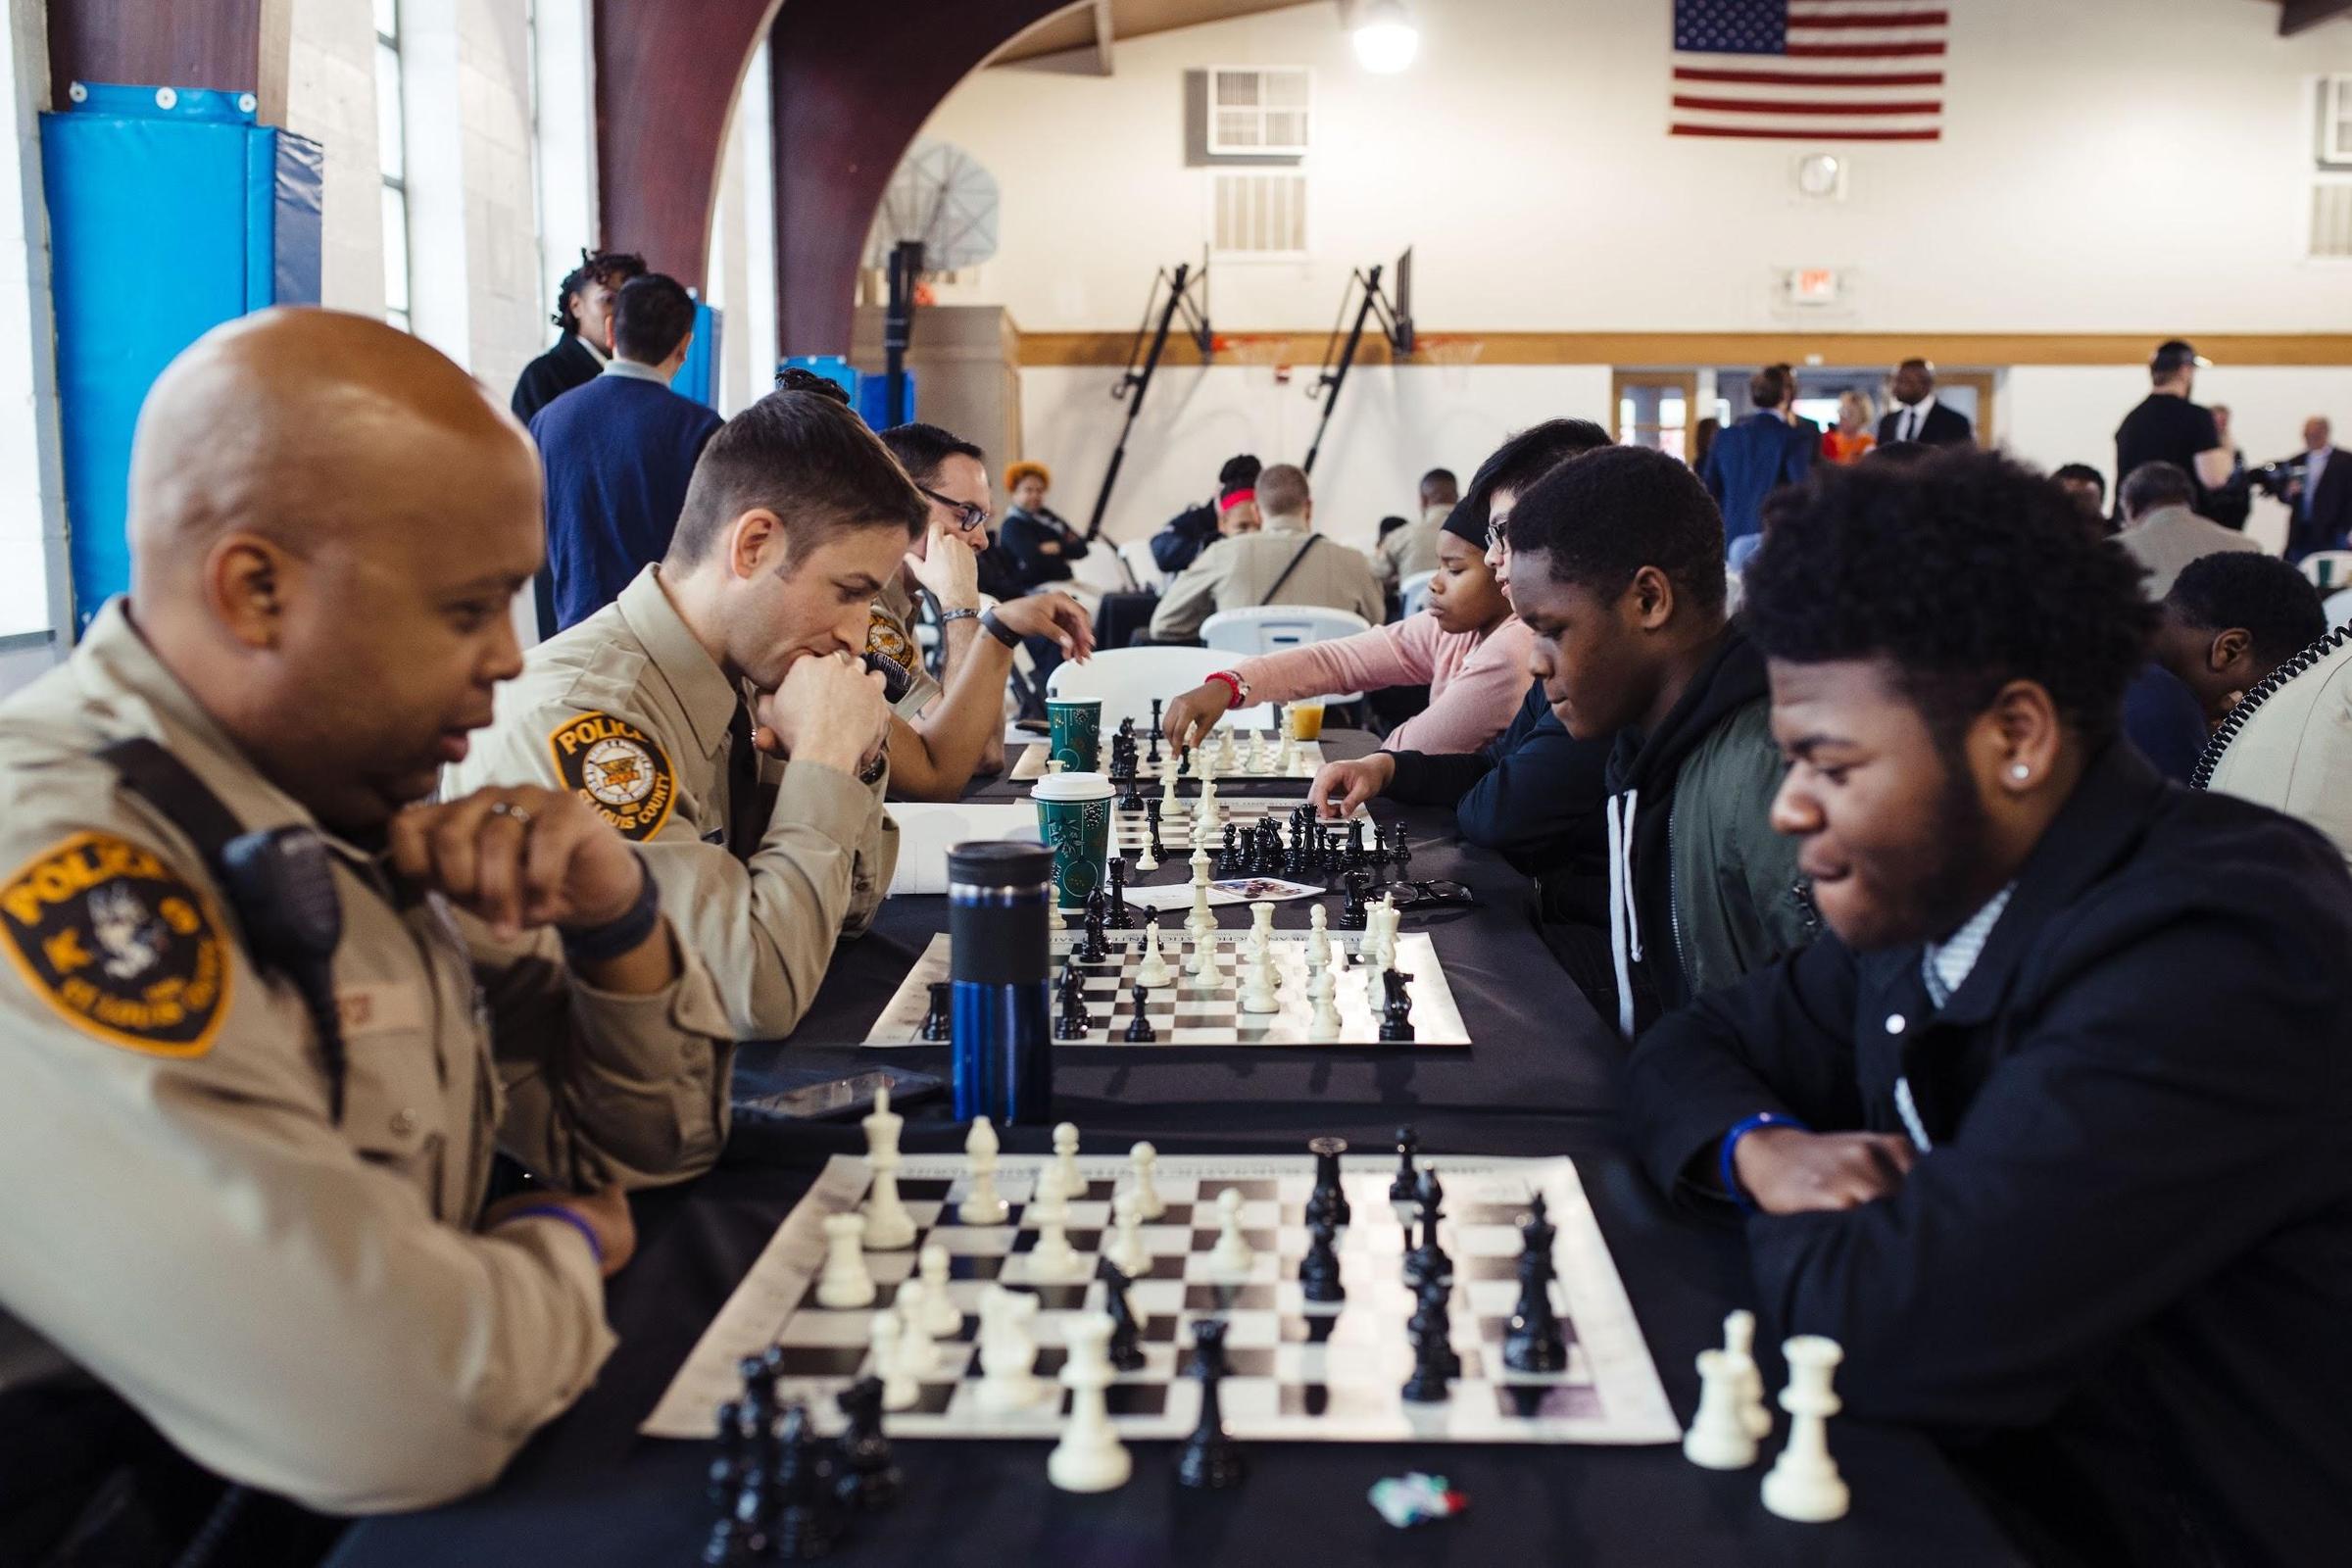 On Chess: Cops And Kids Team Up To Play Chess And Build Relationships | St. Louis Public Radio